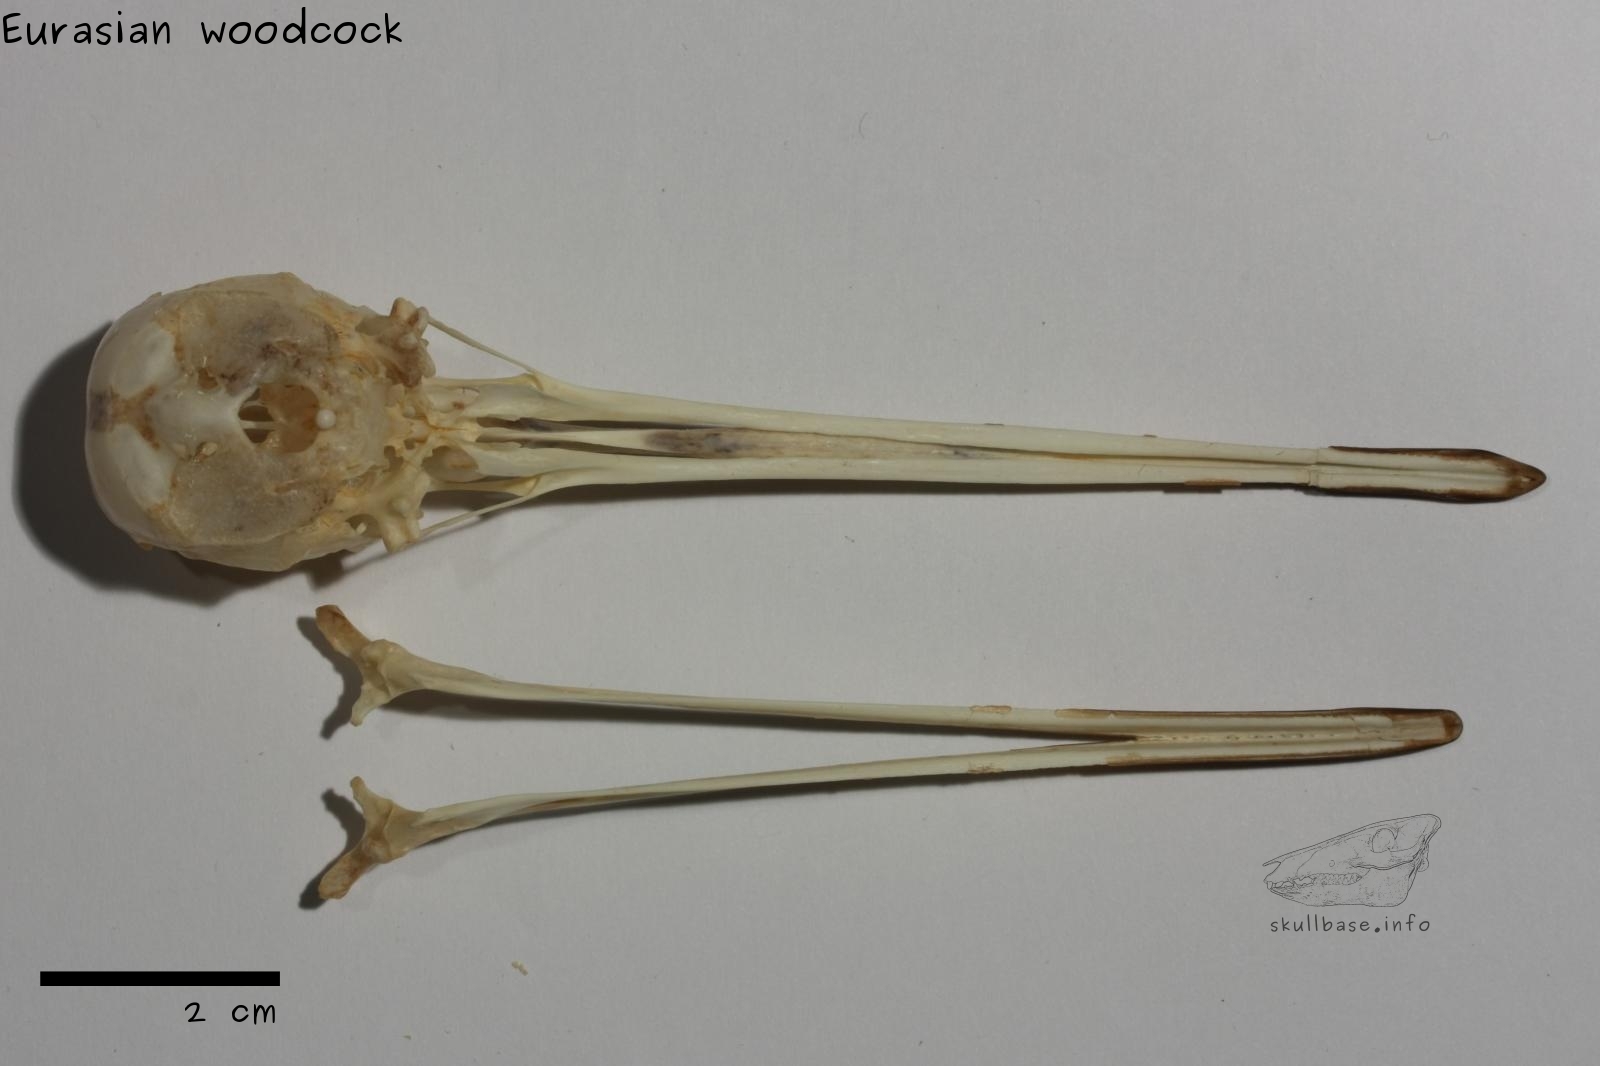 Eurasian woodcock (Scolopax rusticola) ventral view and jaw